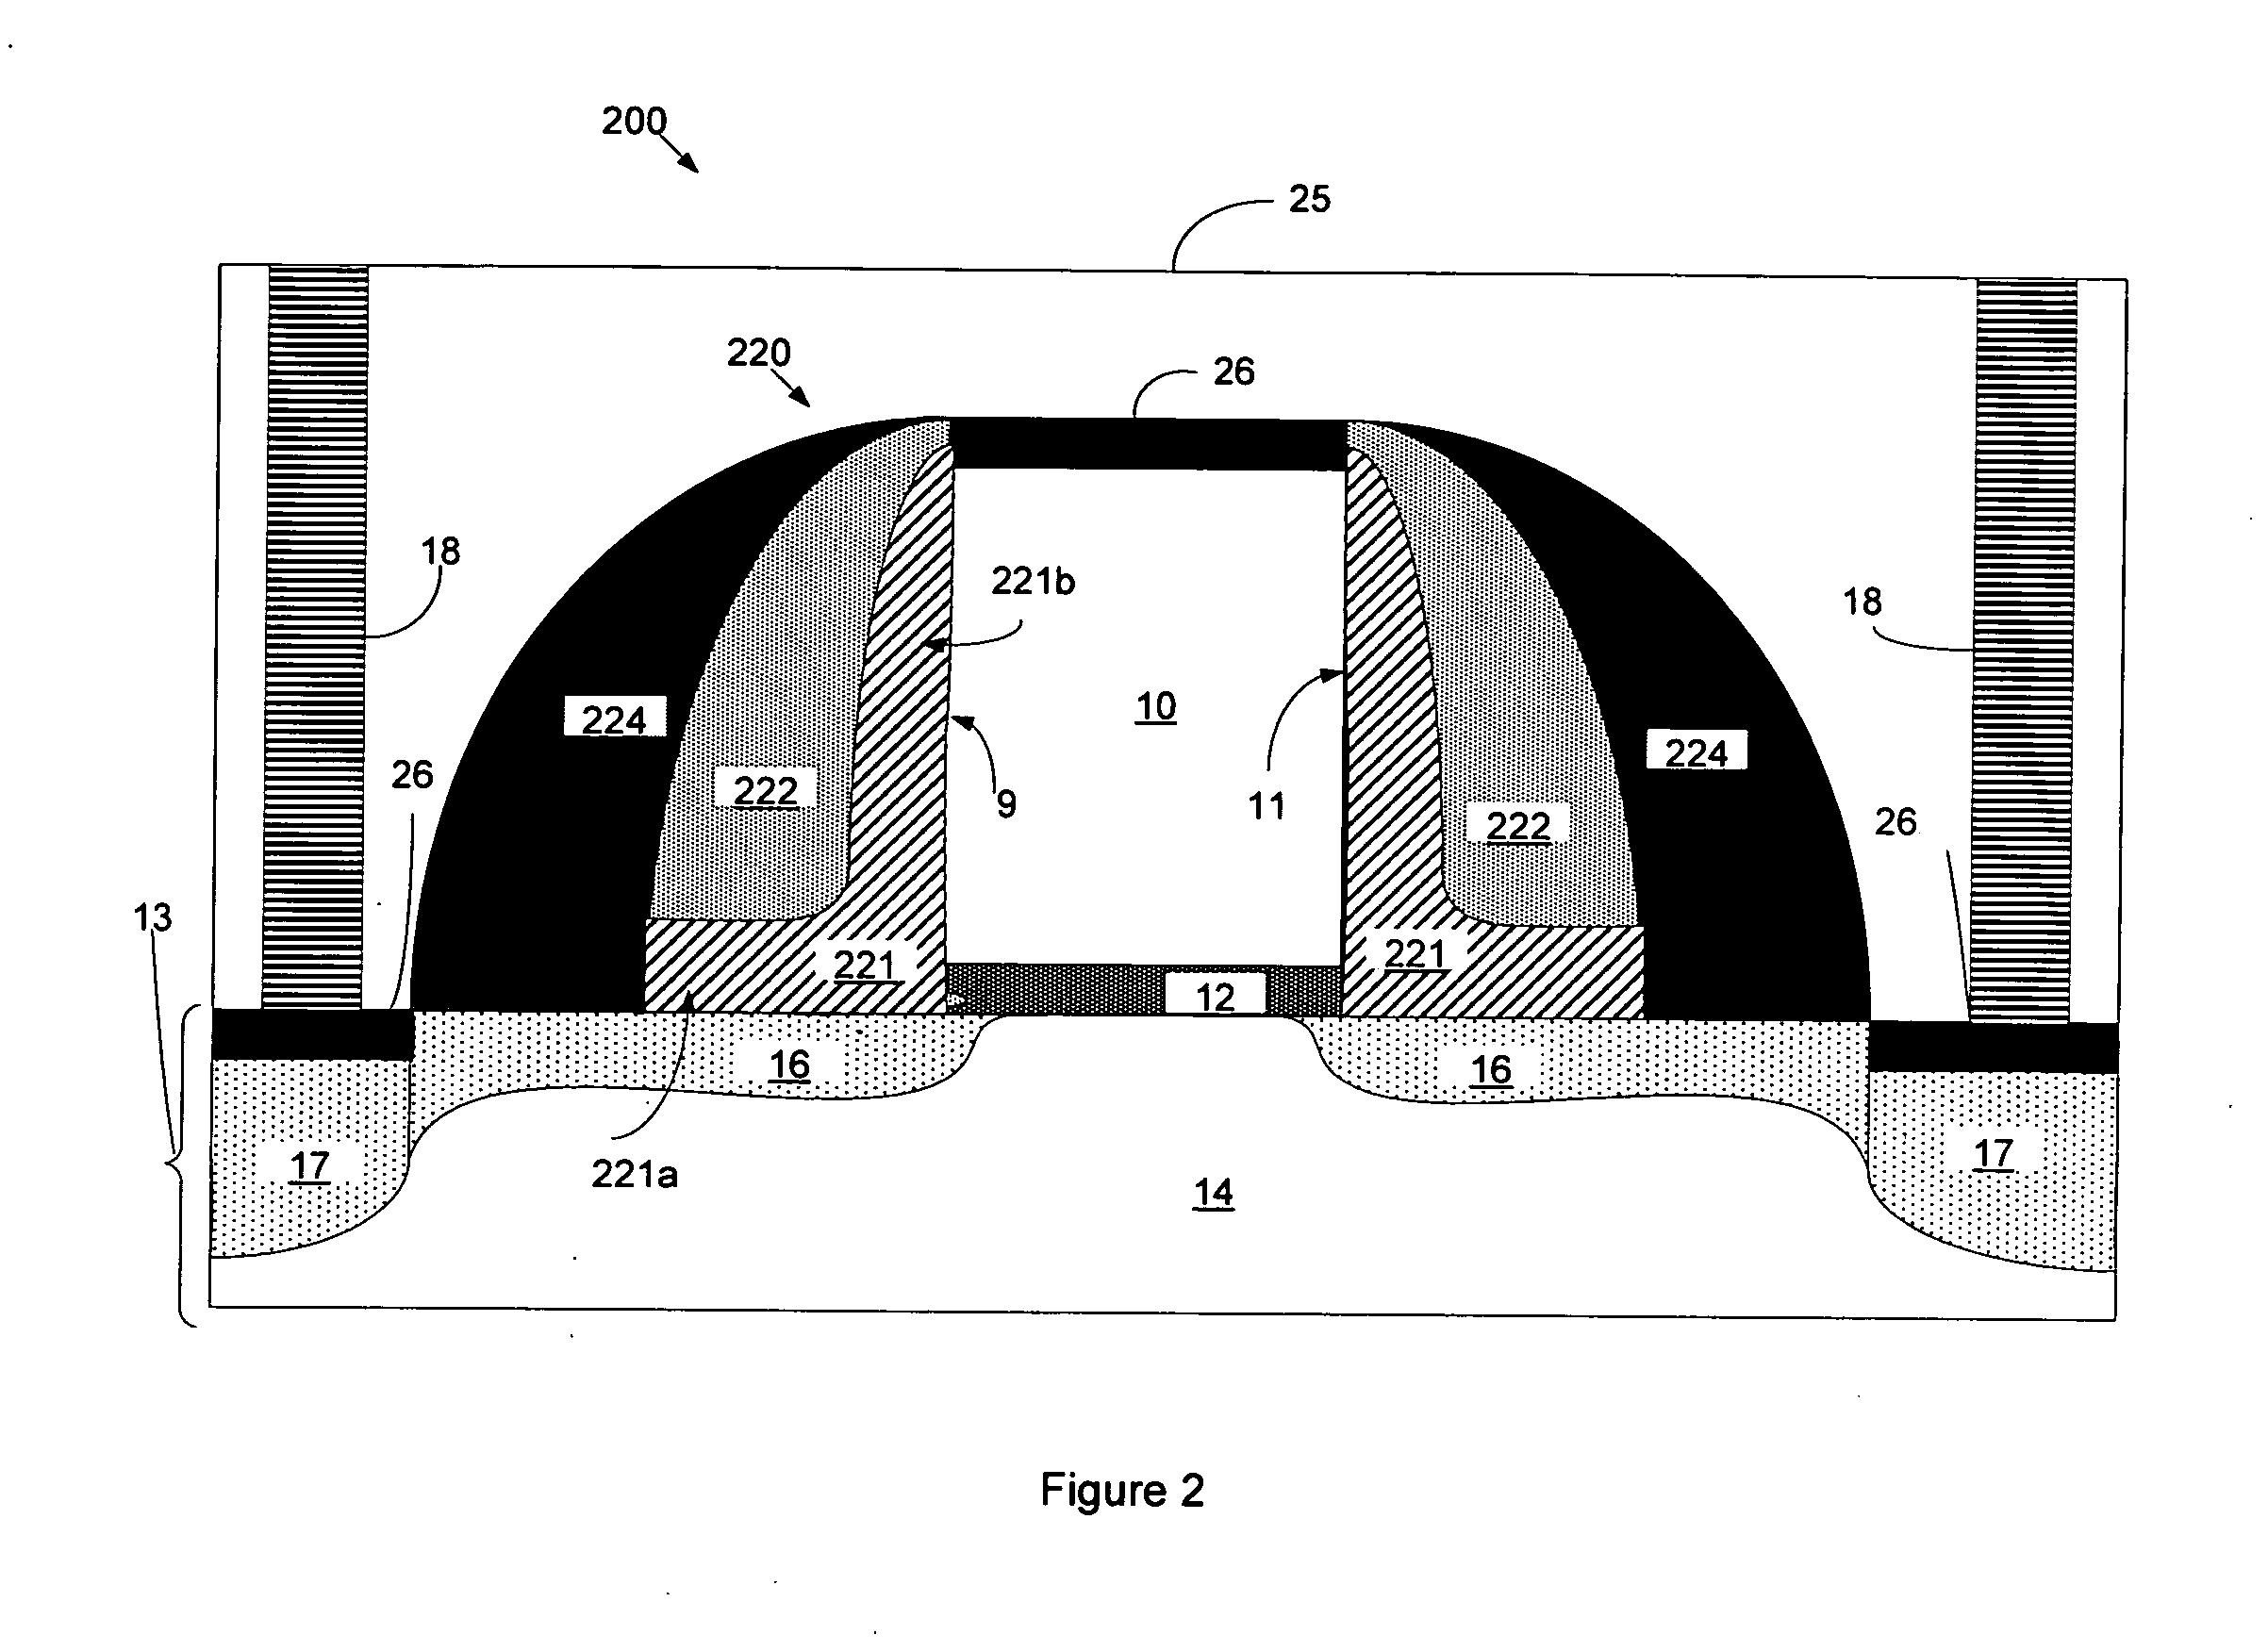 MOSFET structure with ultra-low K spacer